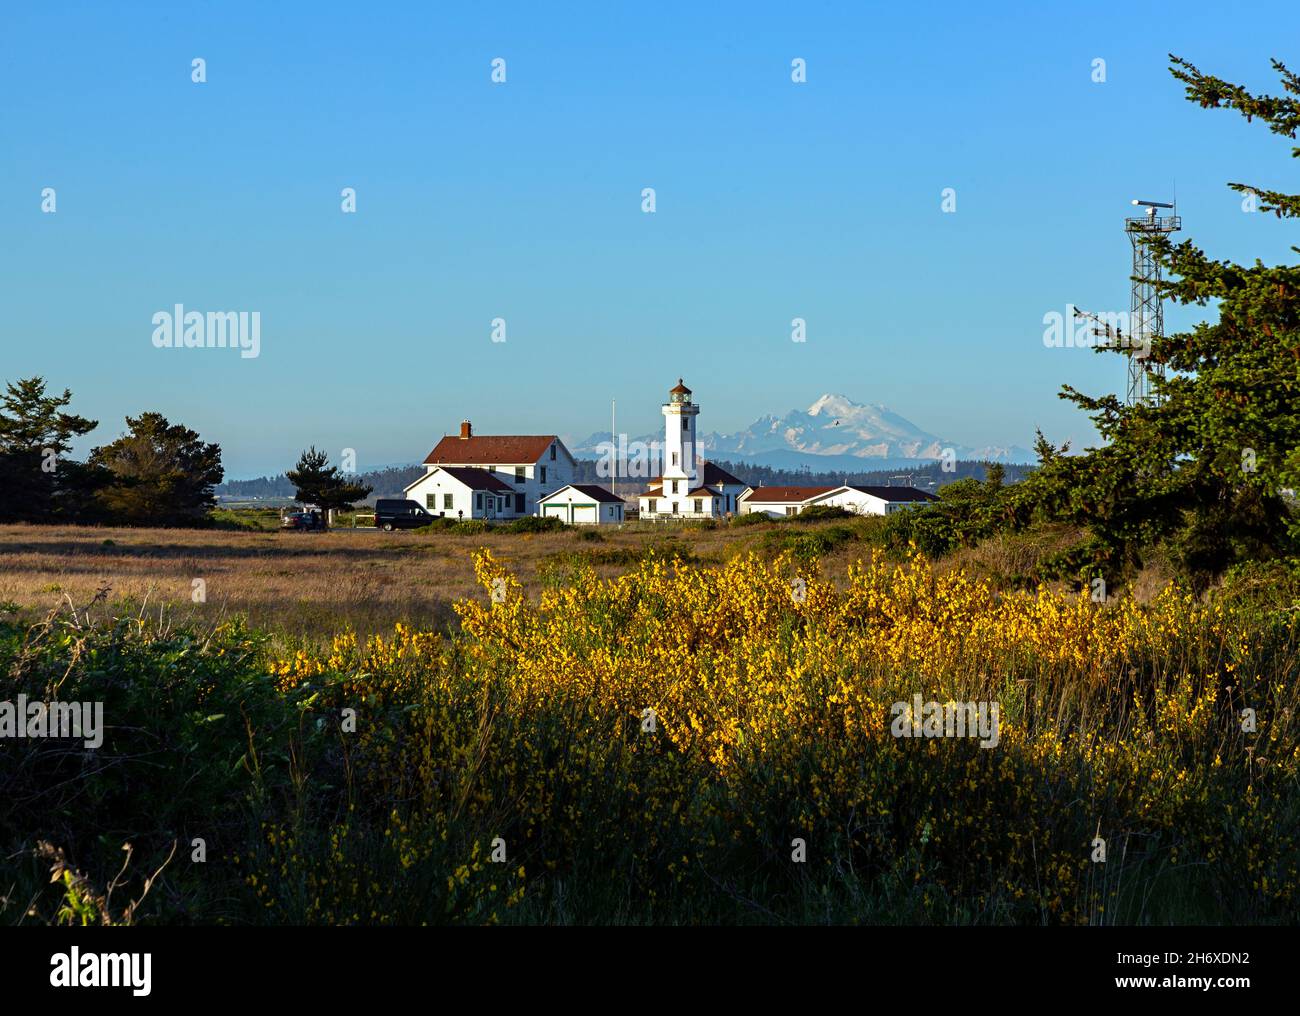 WA19793-00...WASHINGTON - Point Wilson Lighthouse and Mount Baker viewed at sunset from Fort Worden State Park. Stock Photo